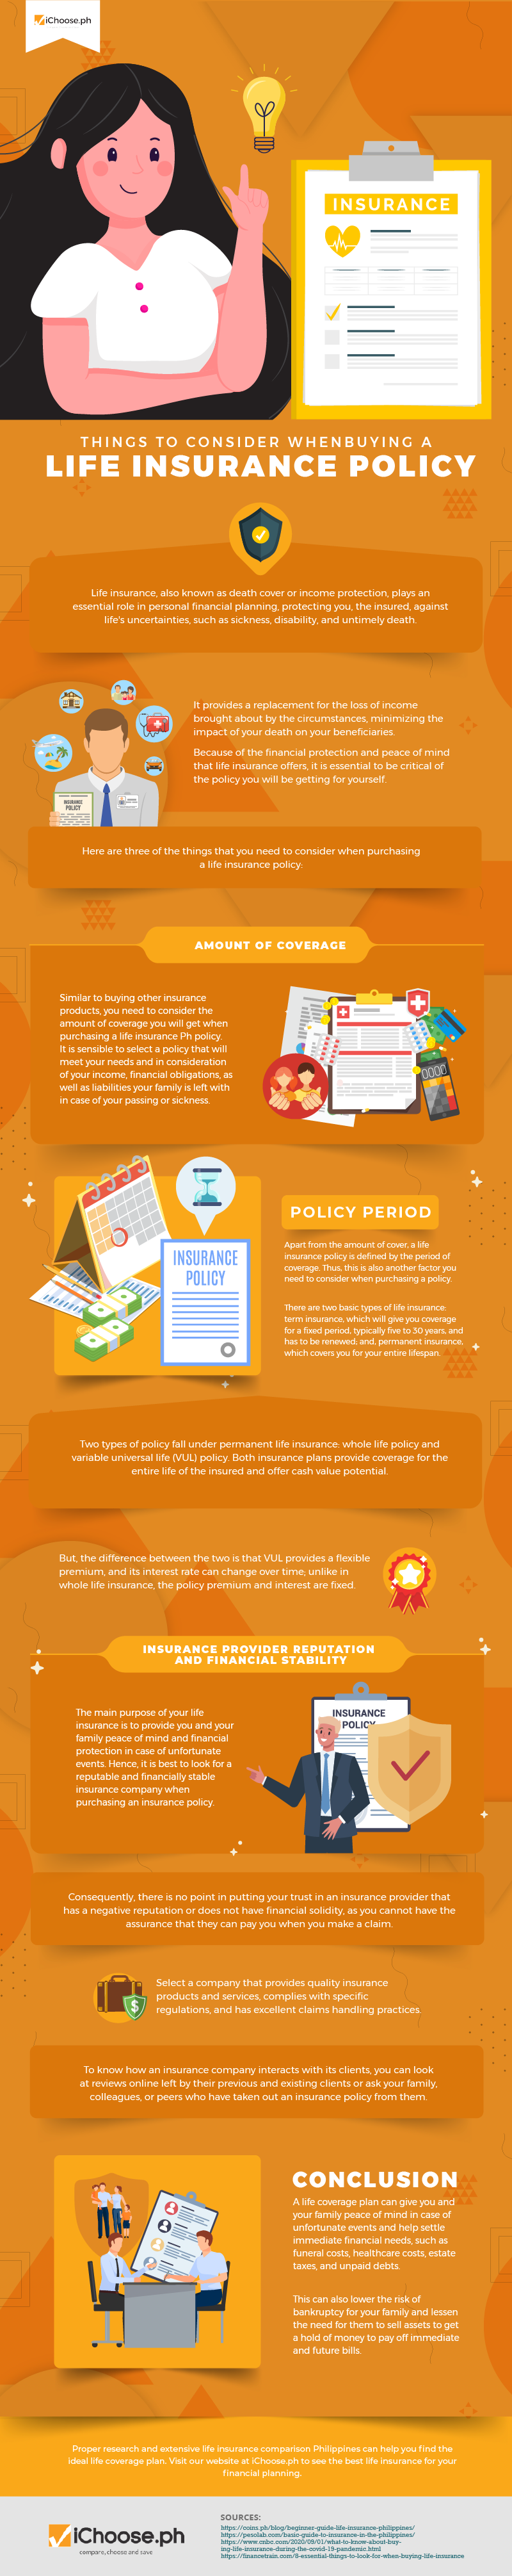 Things-to-Consider-When-Buying-a-Life-Insurance-Policy-Infographic